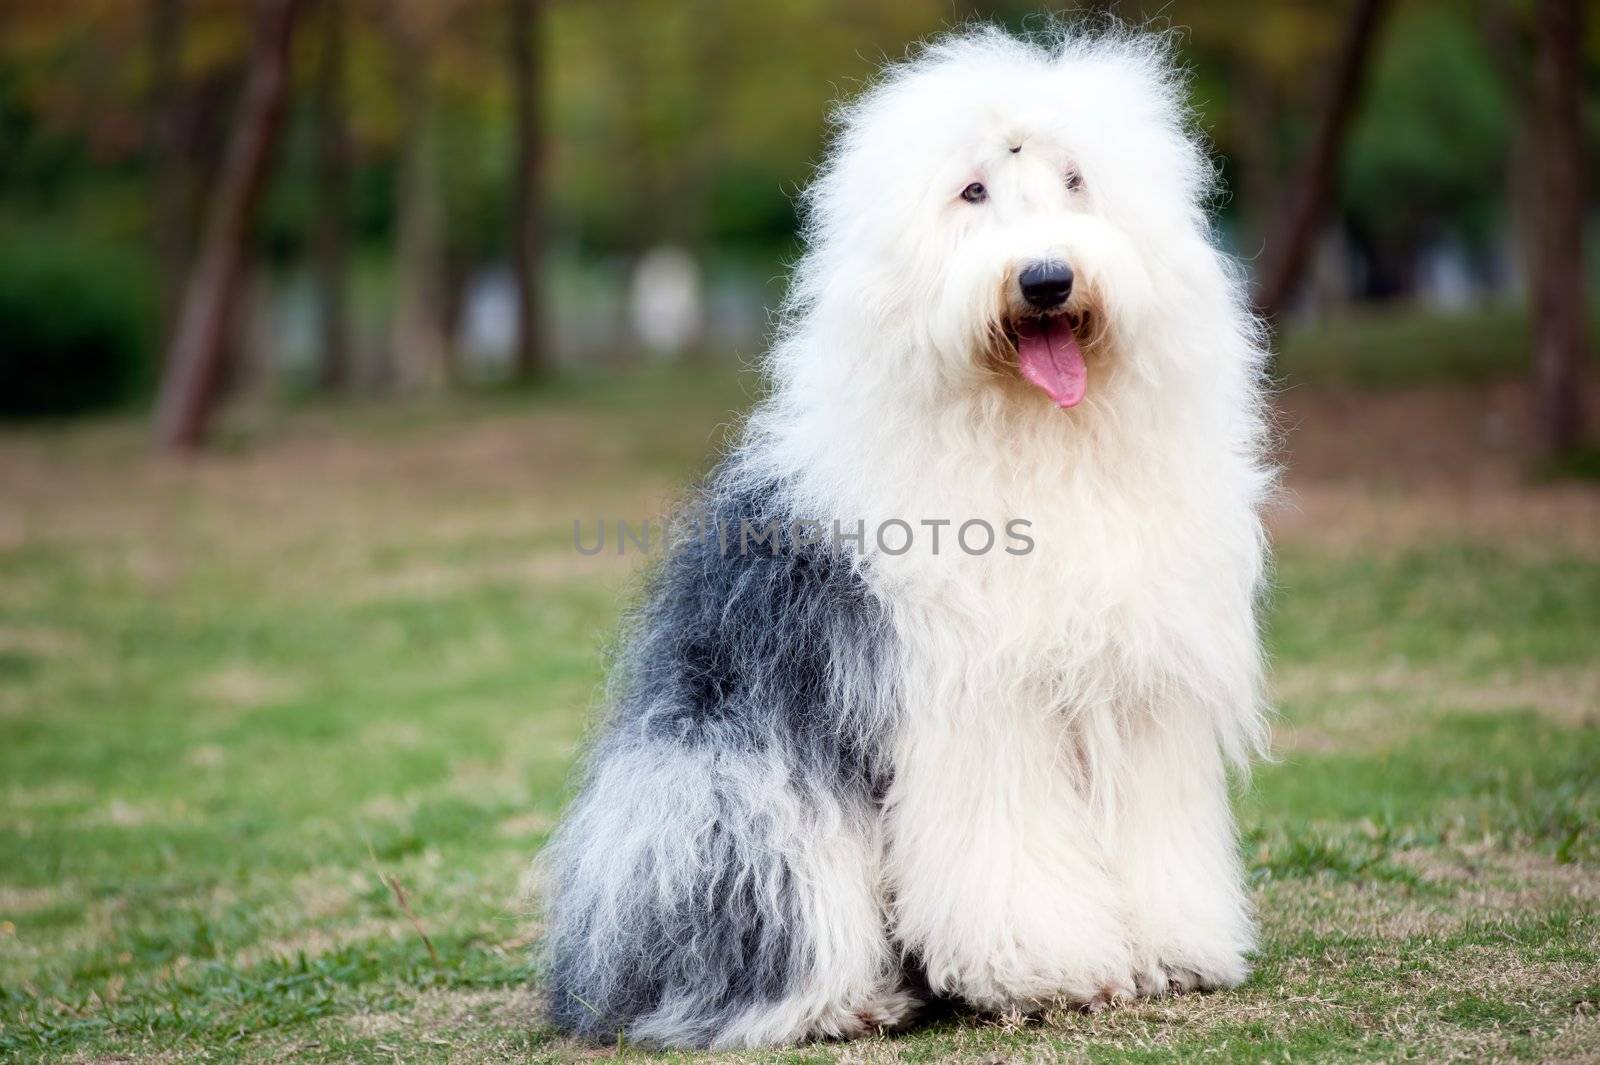 An old English sheepdog standing on the lawn